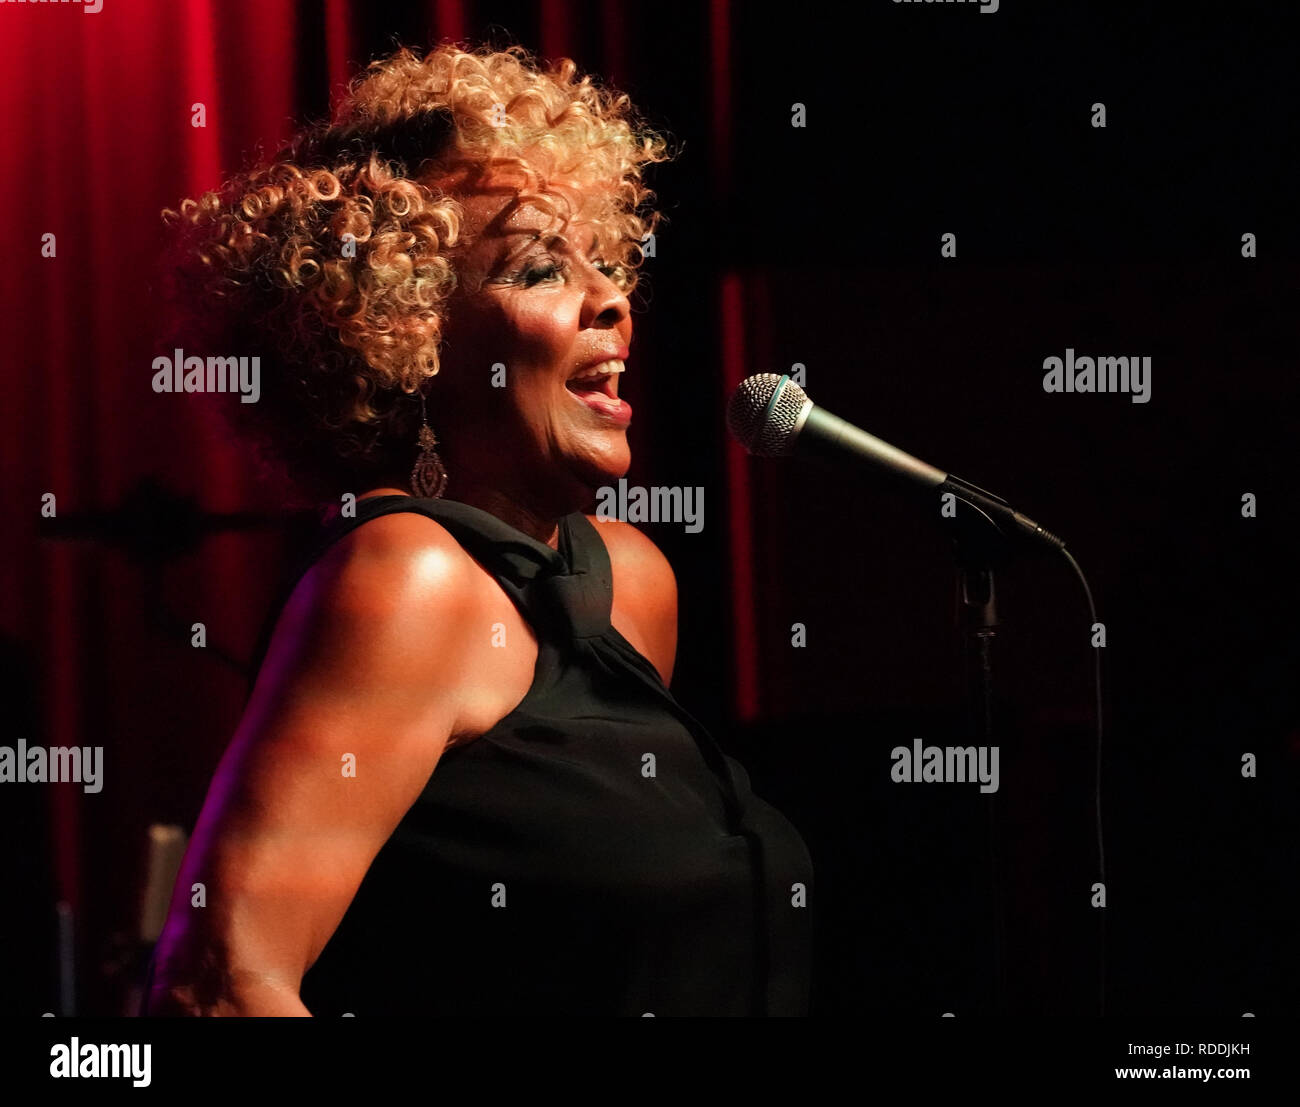 Los Angeles, CA, USA. 17th Jan, 2019. Musician Actor - THELMA HOUSTON, honored at The Grammy Museum, Los Angeles, CA, USA, January 17, 2019. Ms. Houston is an American singer and actress. She scored a number-one hit in 1977 with her recording of ''Don't Leave Me This Way'', which won the Grammy for Best Female R&B Vocal Performance. 25 years ago to the day, Ms. Houston lost her Grammy Award in the devastating Northridge earthquake. Scott Goldman, artistic director for the Grammy Muesum, presented Ms. Houston with a replacement grammy award. Ms. Houston performed some of her biggest hi Stock Photo